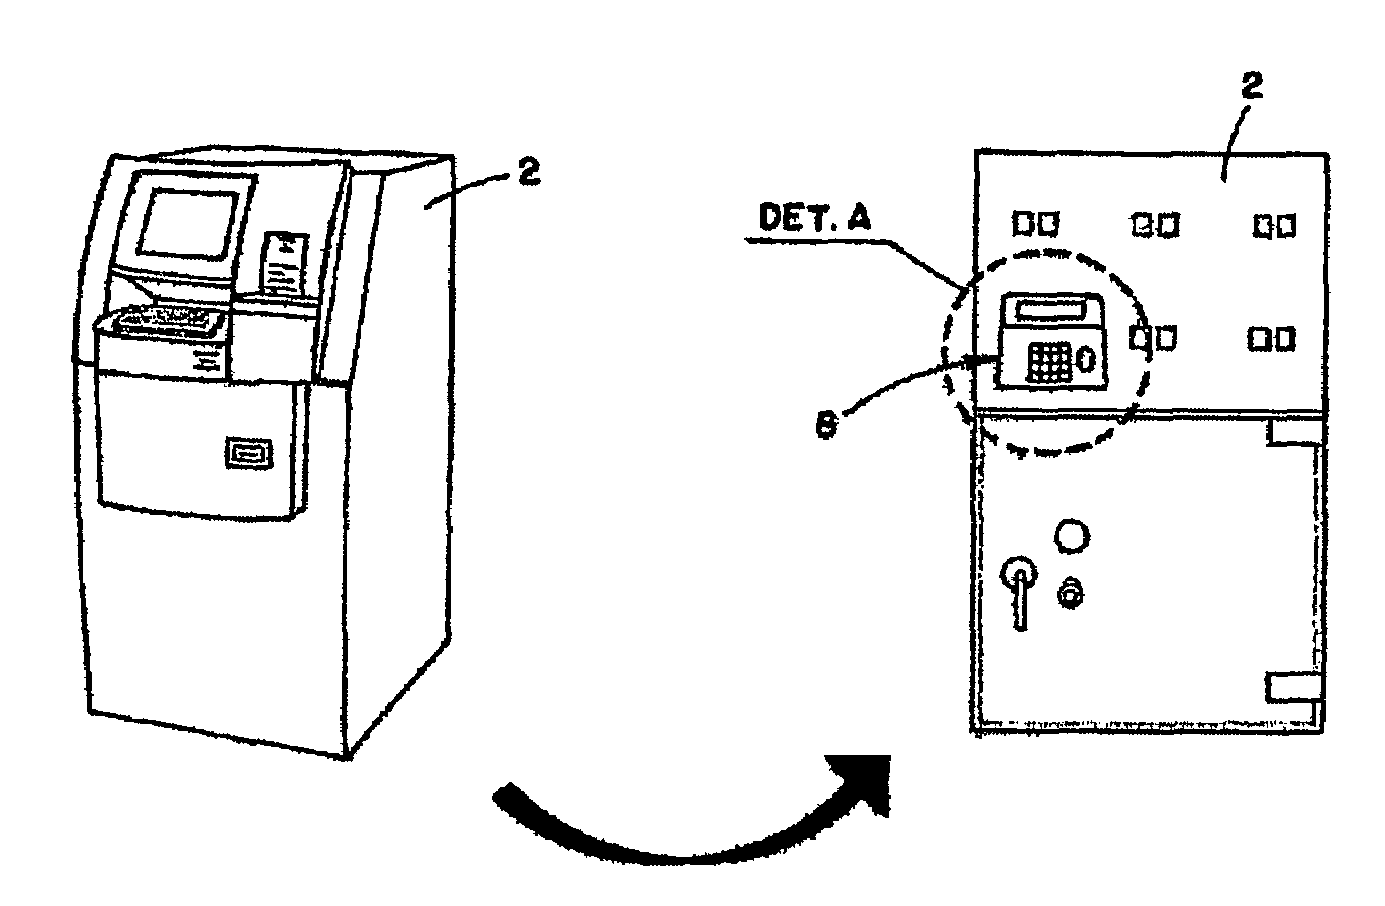 Controlling, monitoring and managing system applied in self-service equipment for banking